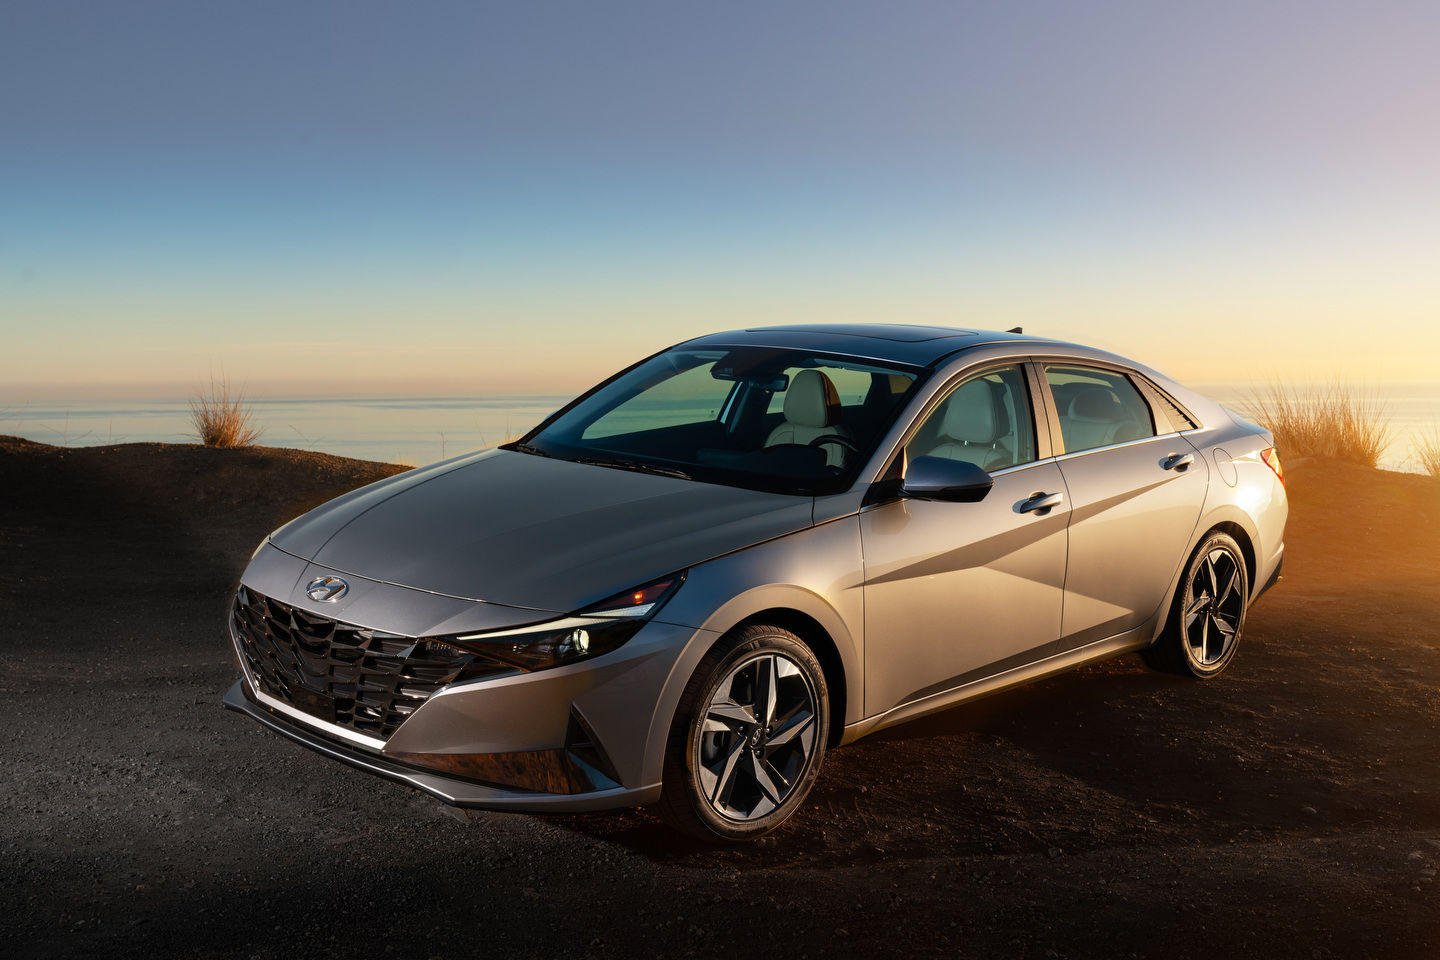 What Makes the 2023 Hyundai Elantra Stand Out from the 2023 Honda Civic